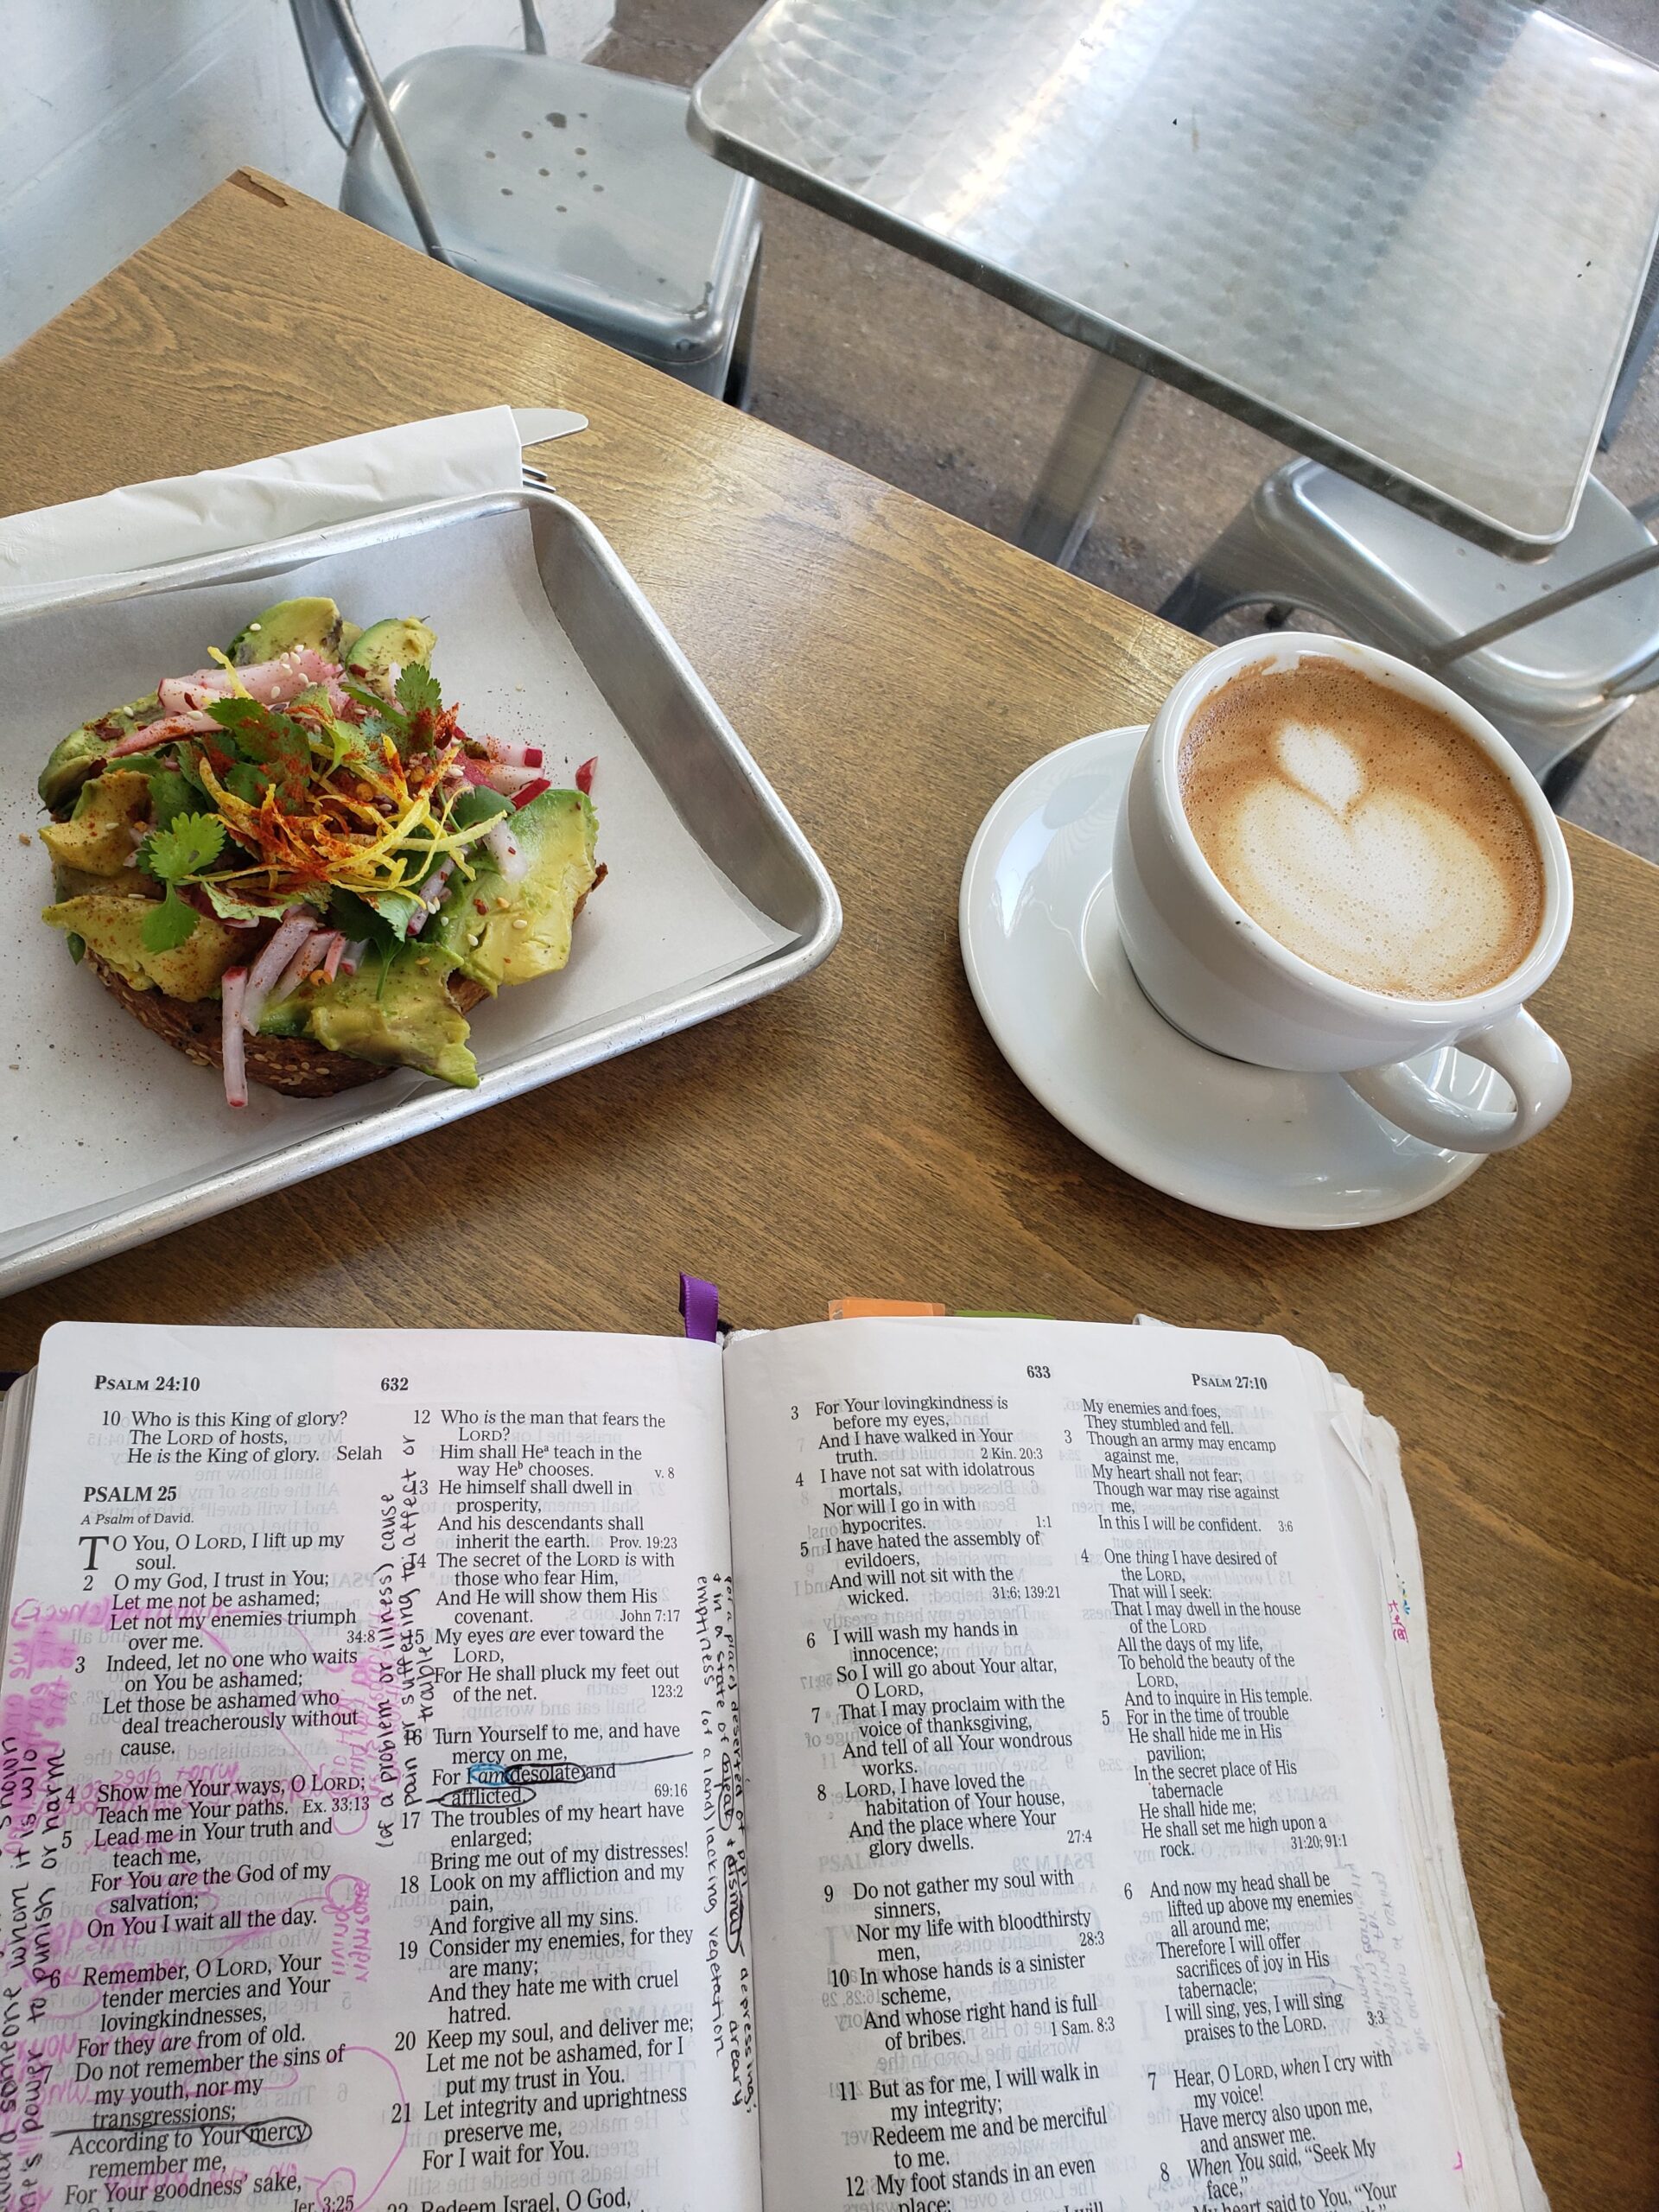 Bible time, coffee, and avocado toast. Is there a better way to spend a restful morning? 